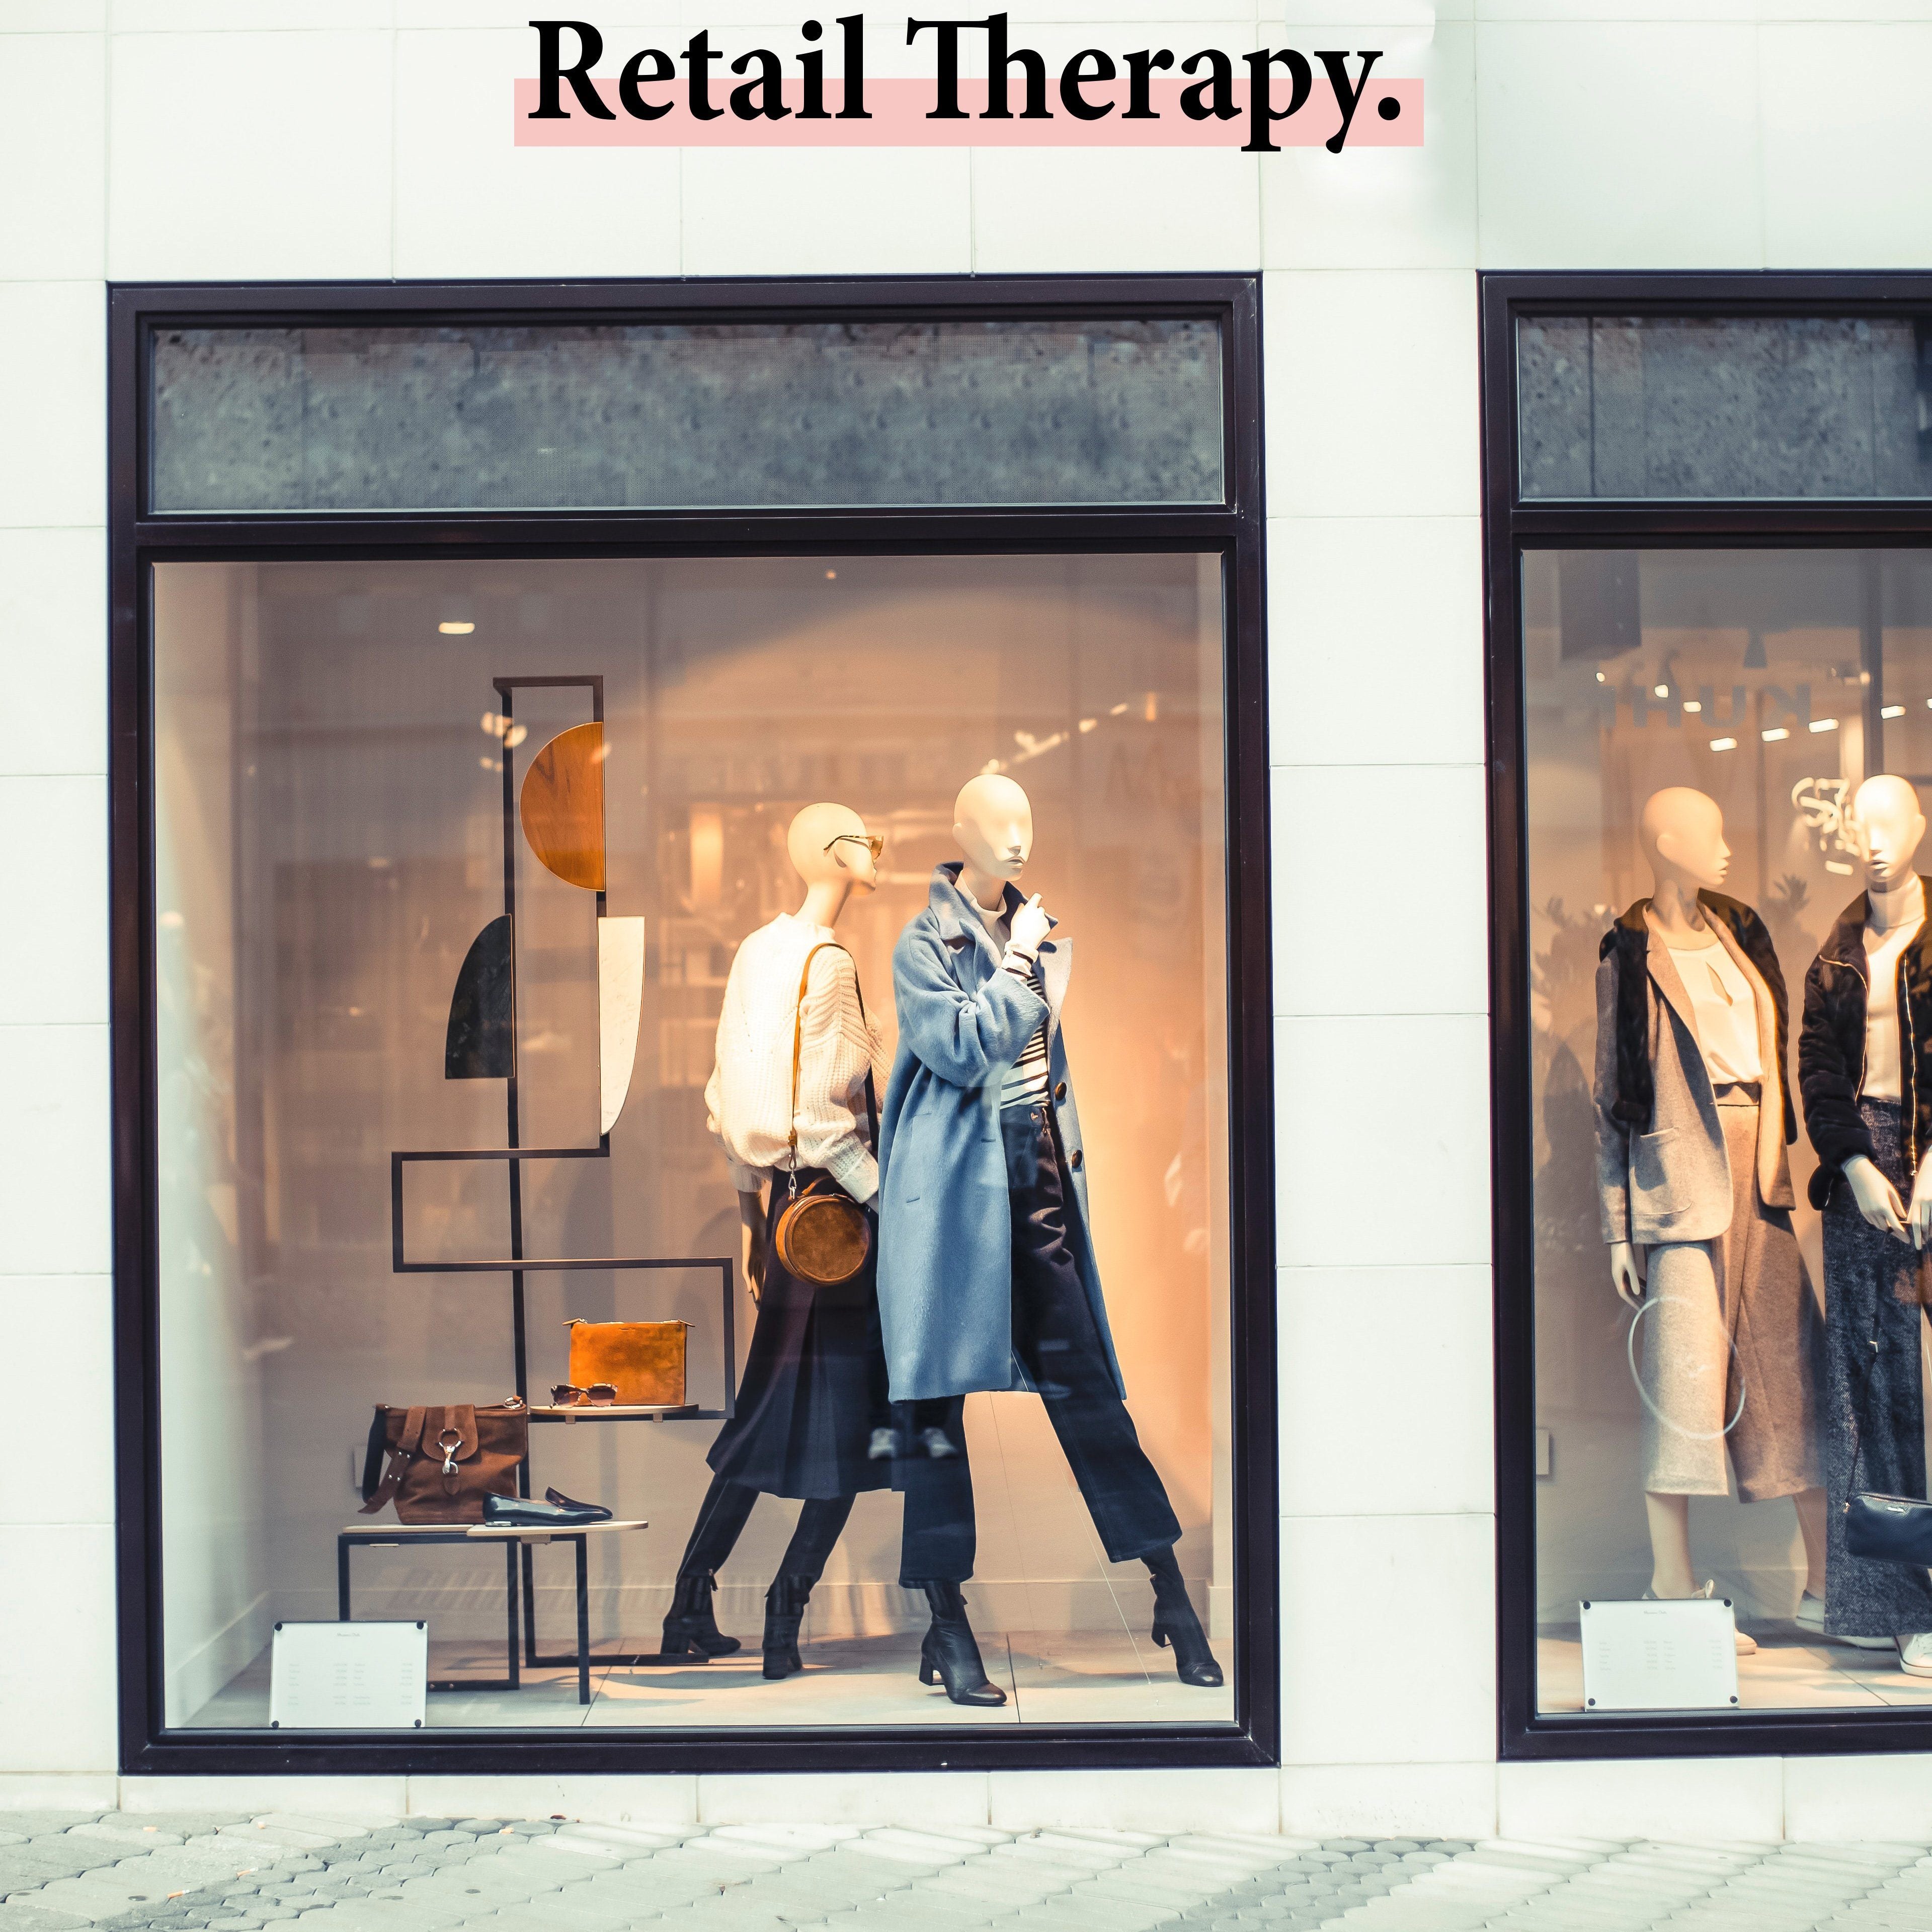 How to Combat Retail Therapy - FRANC